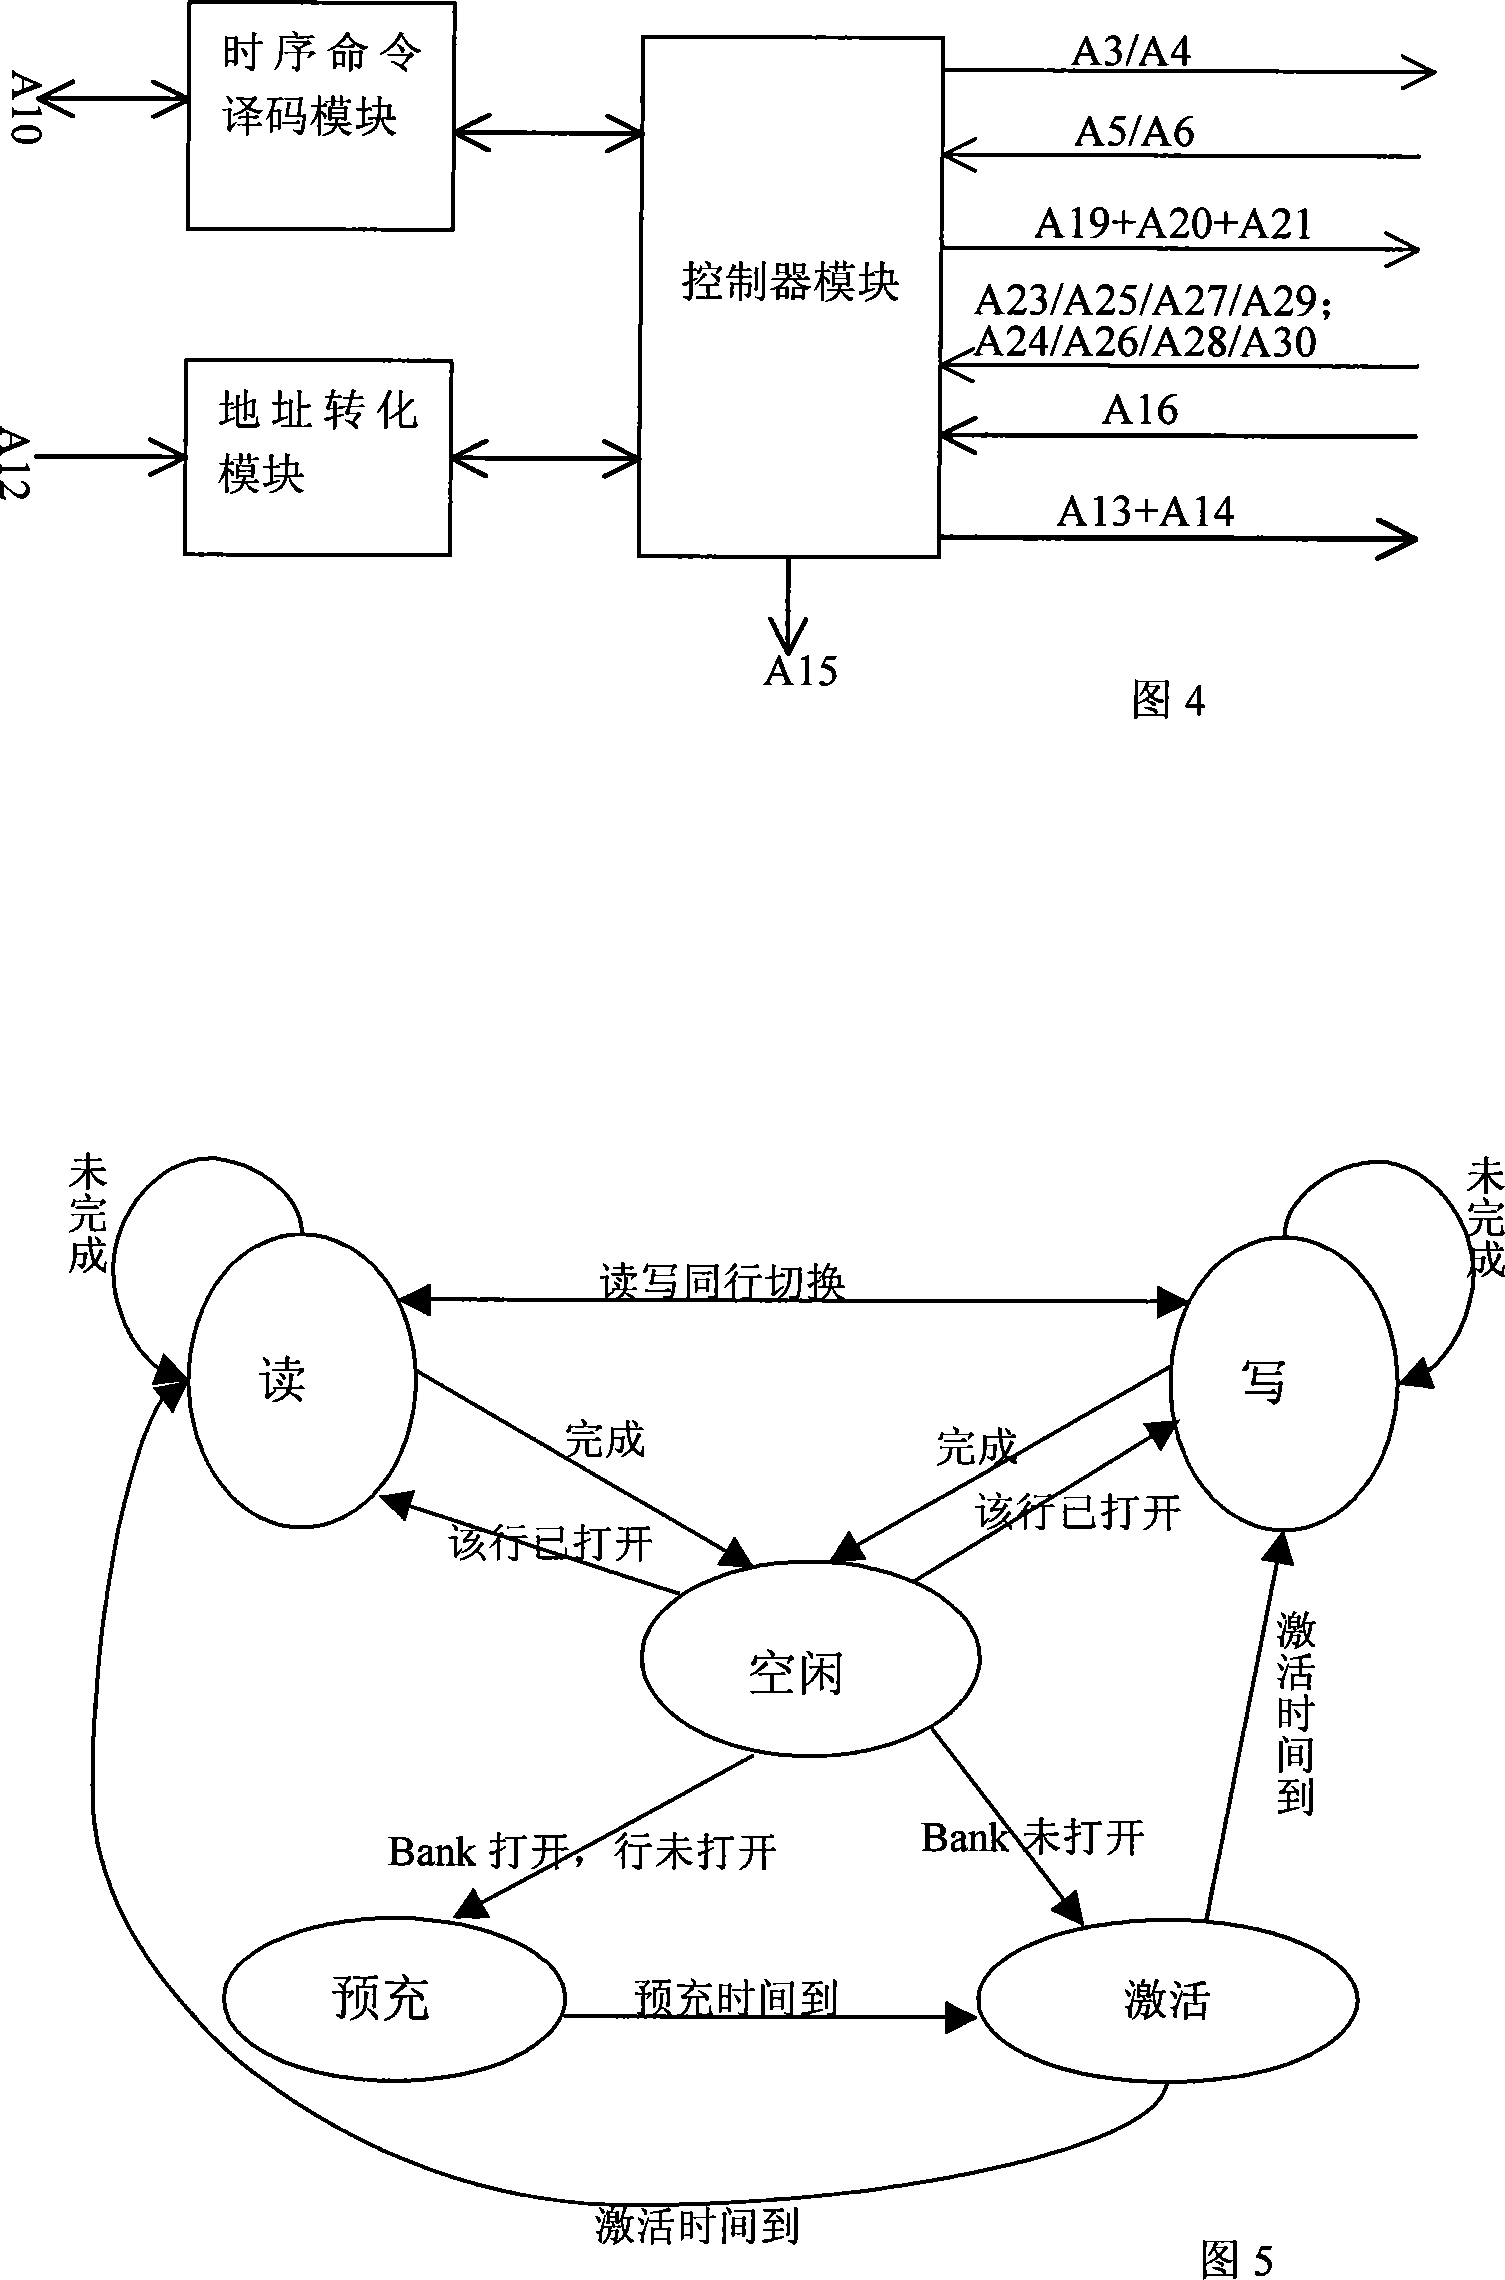 Double-port access single dynamic memory interface